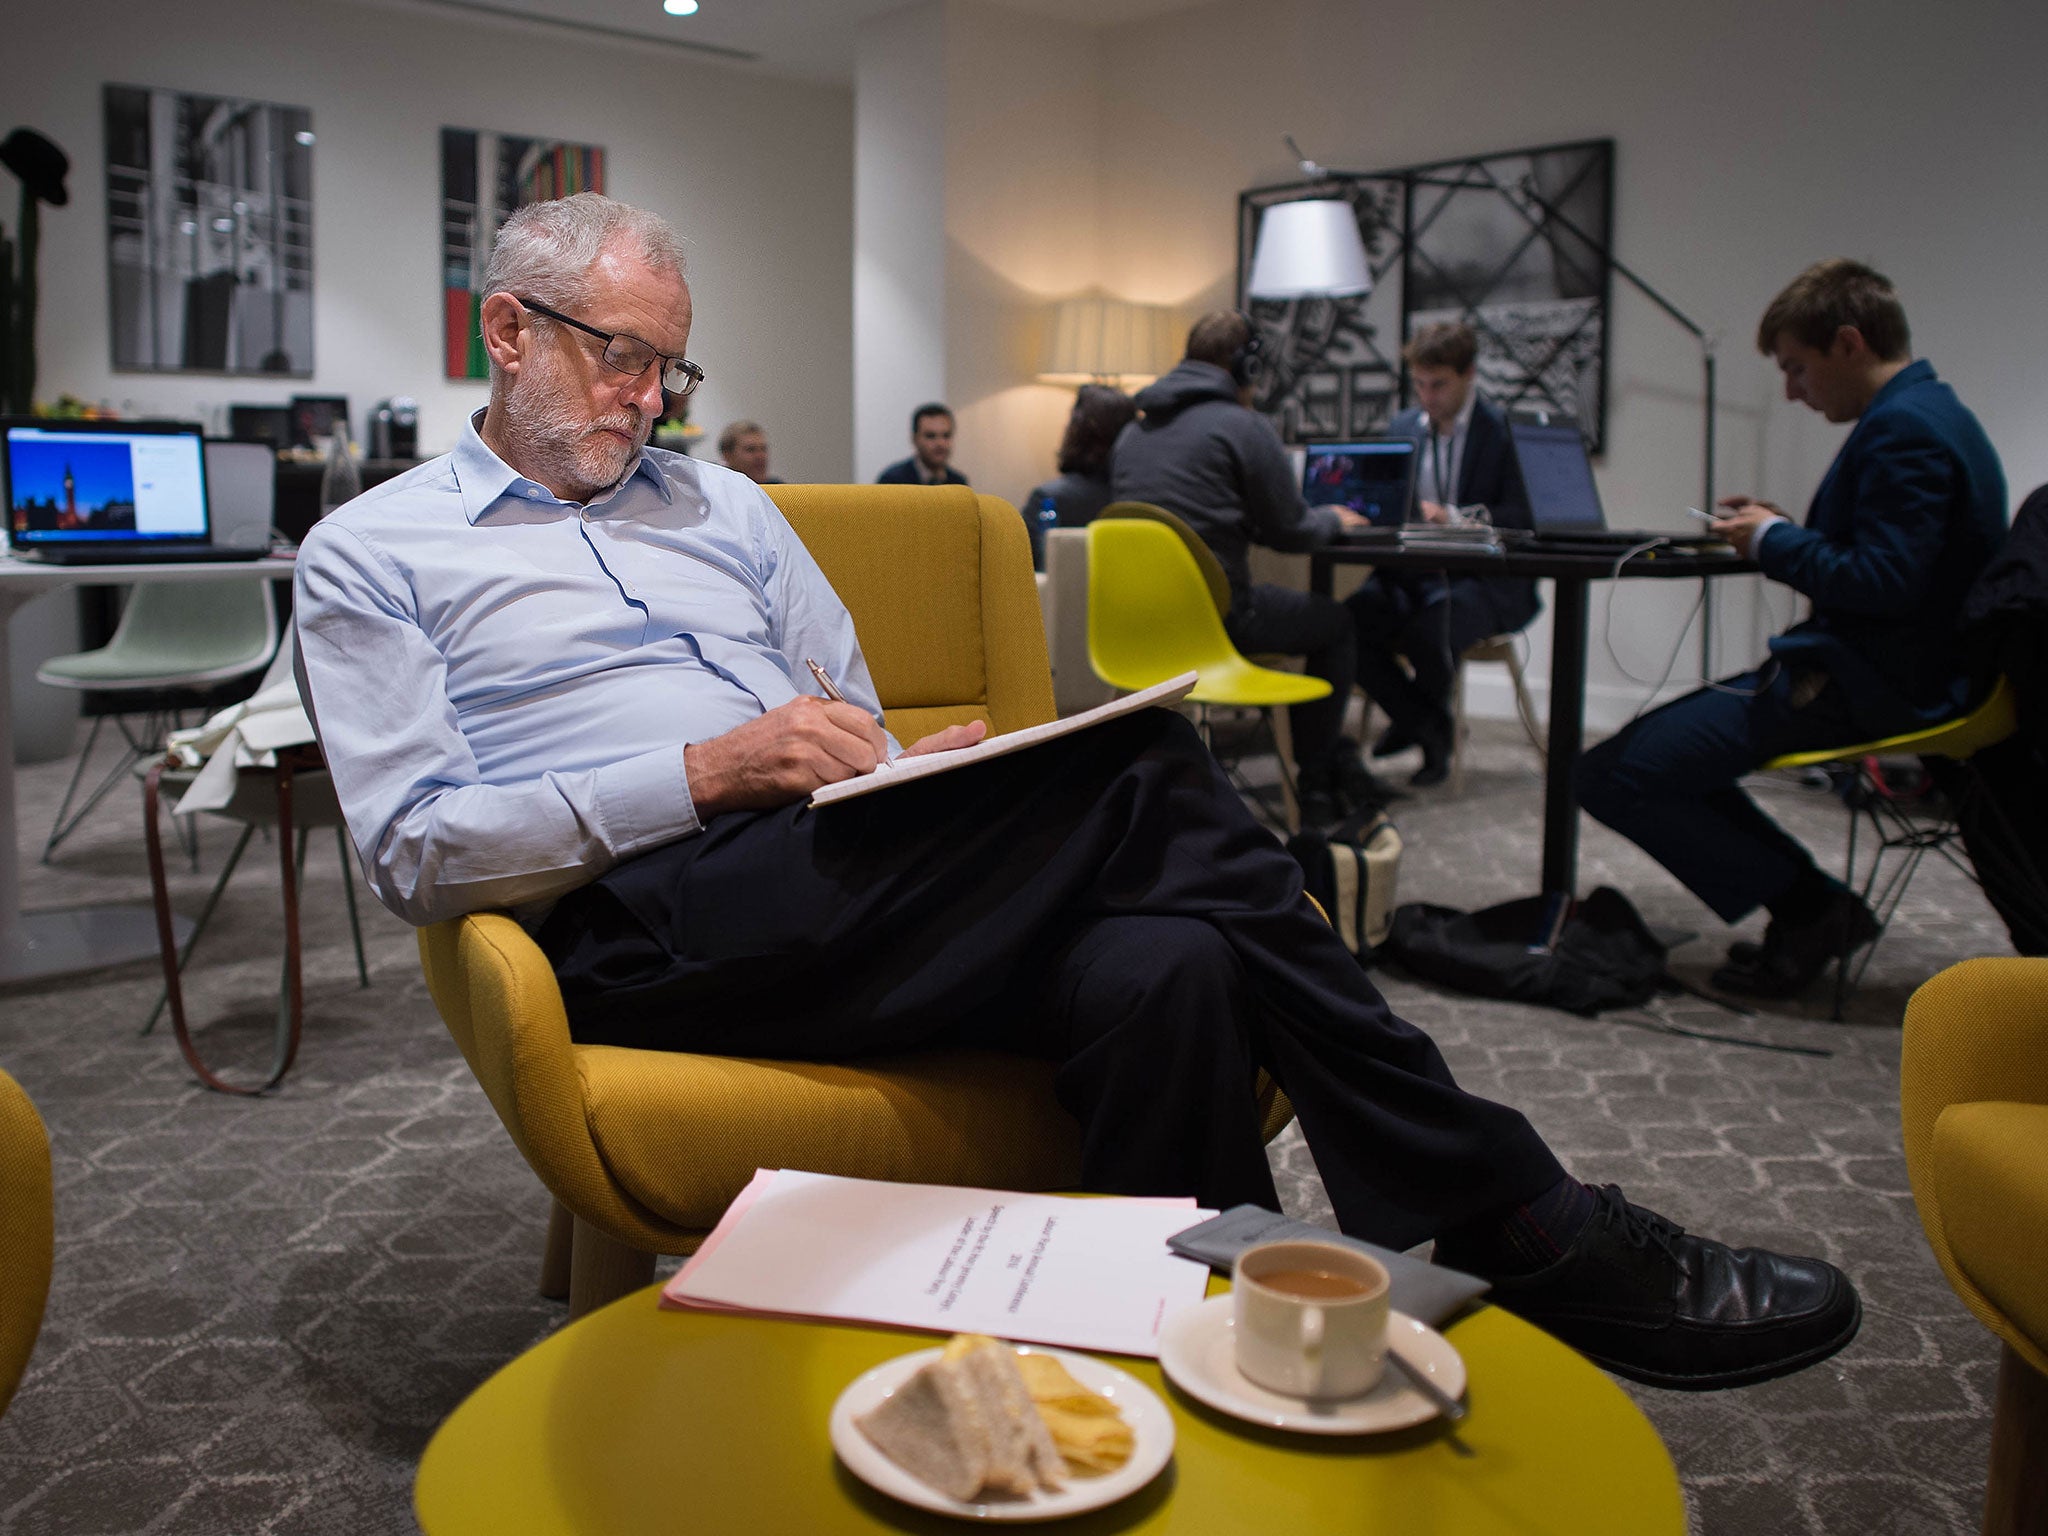 Labour leader Jeremy Corbyn prepares his keynote speech, which he will deliver at the Labour Party conference on Wednesday